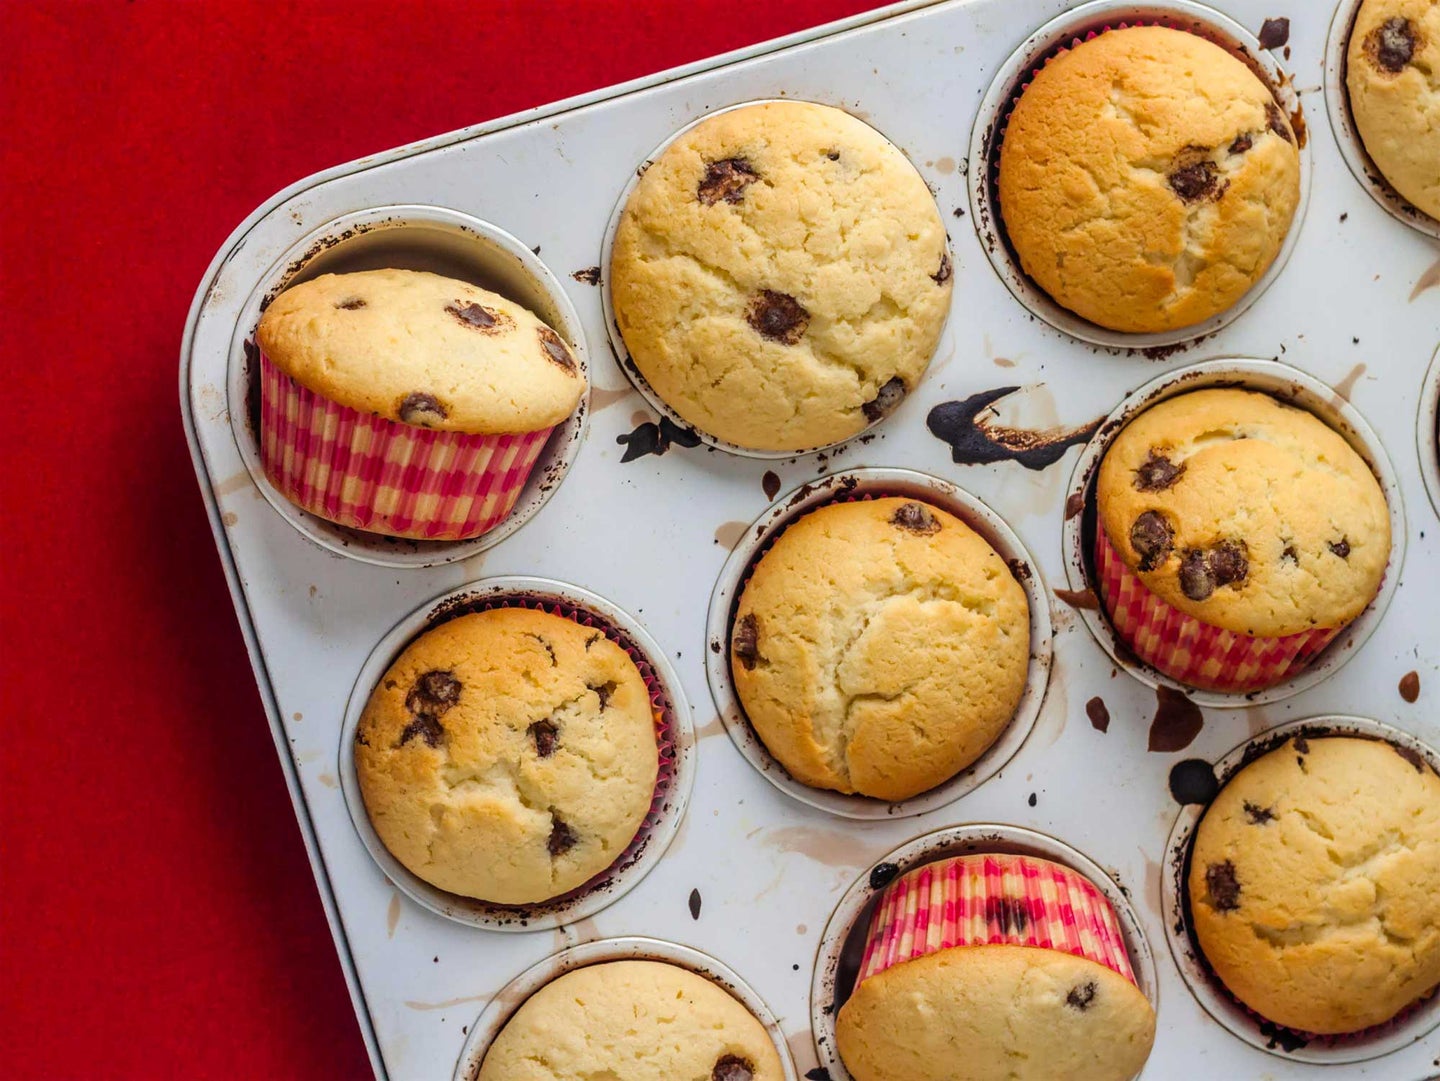 Muffins on a red tablecloth